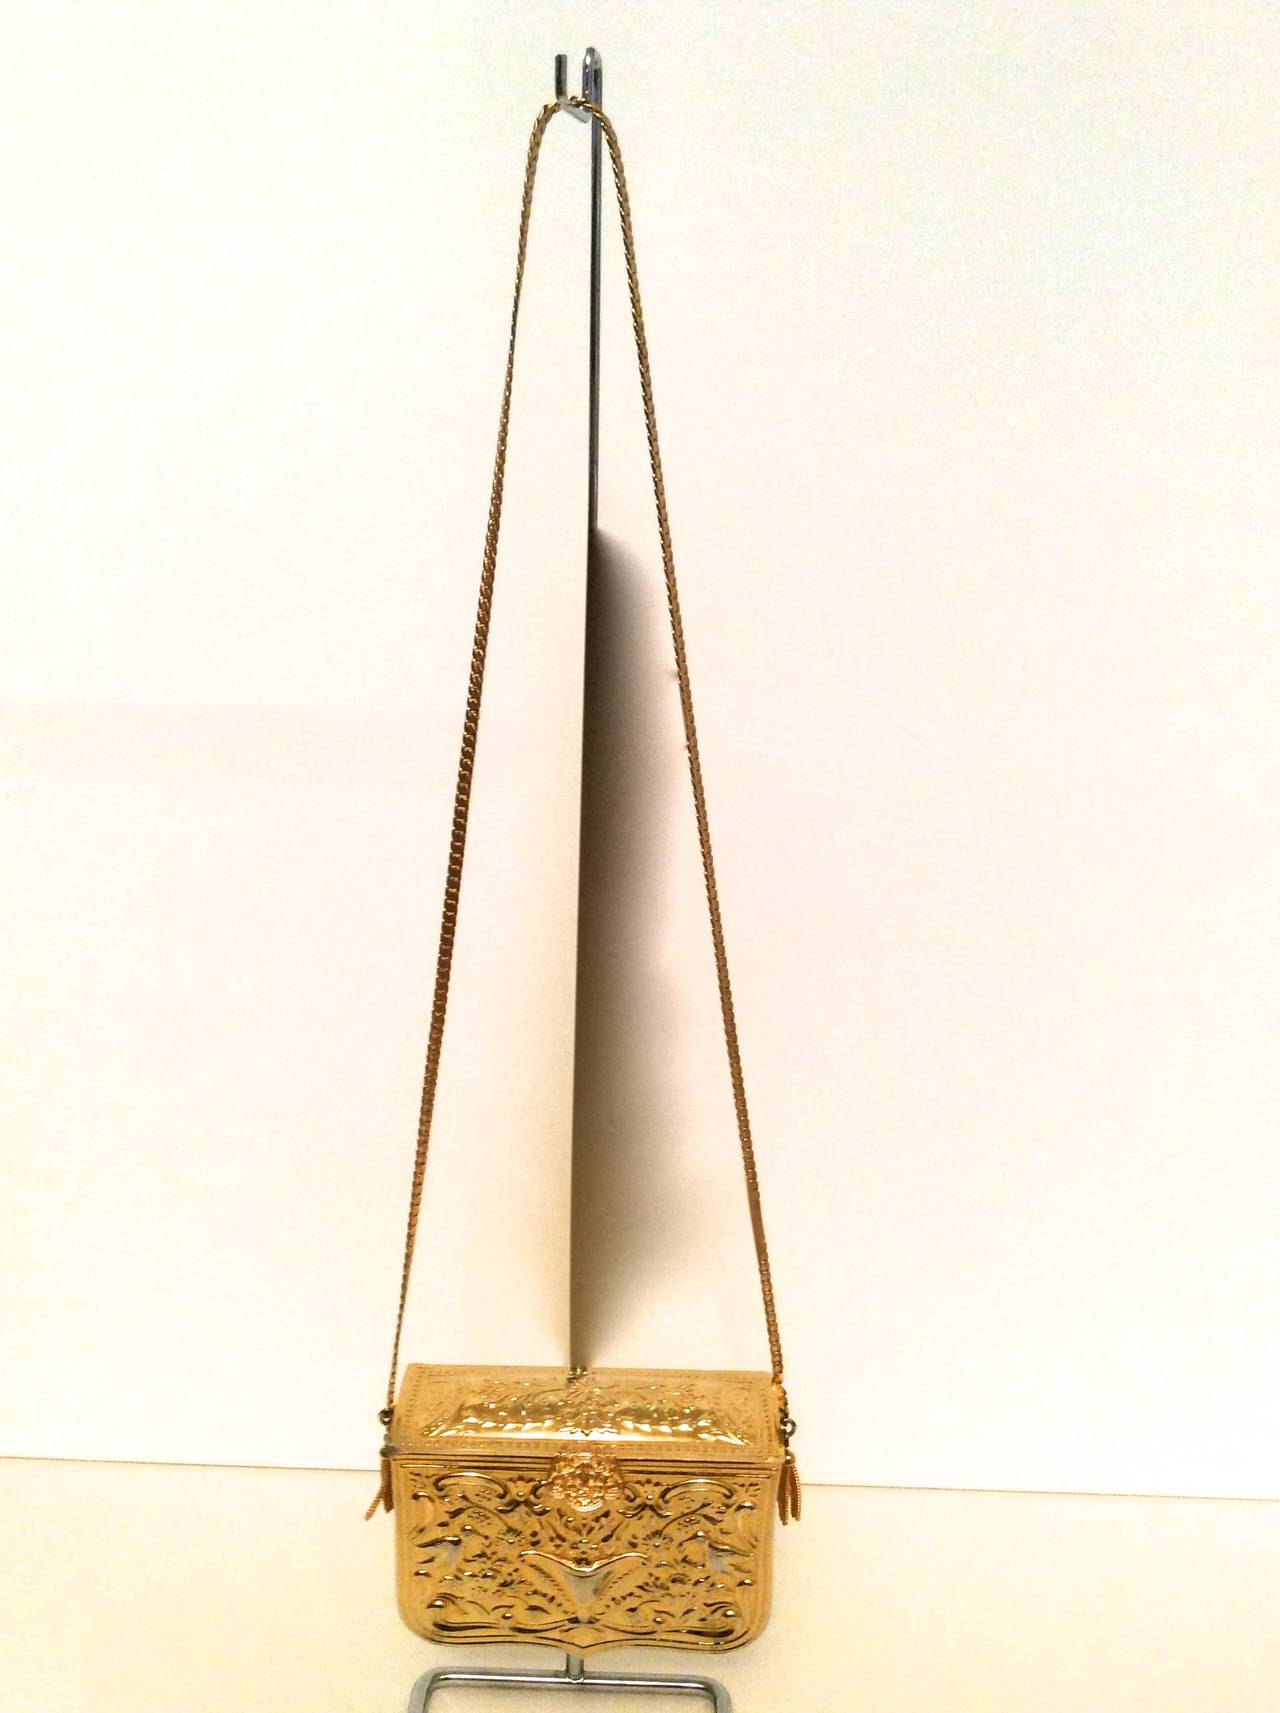 Late 1960's Judith Leiber Rare Gold Tone Cocktail Bag For Sale at 1stdibs